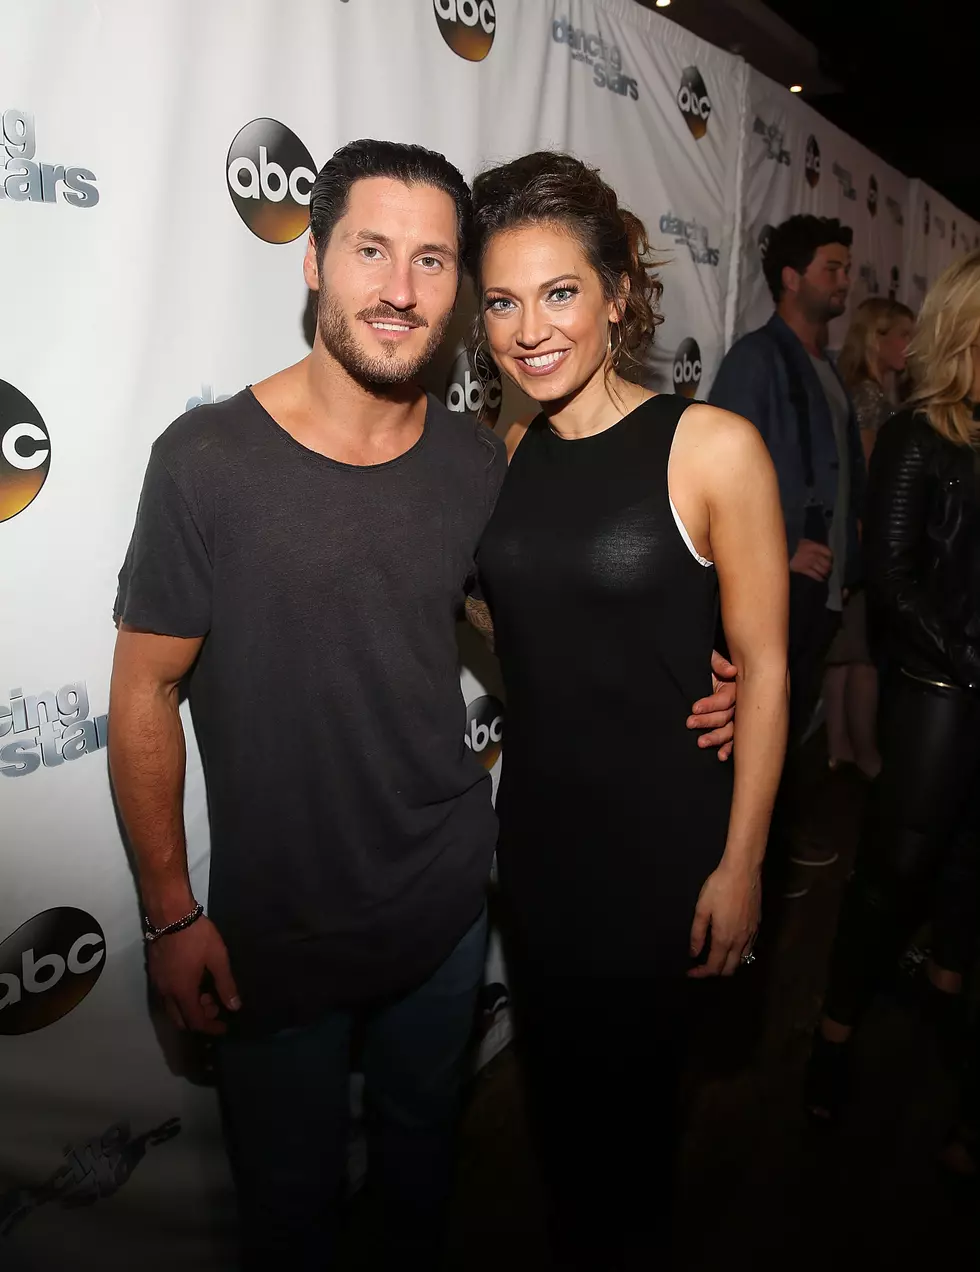 Ginger Zee shines on ‘Dancing with the Stars’ despite injury